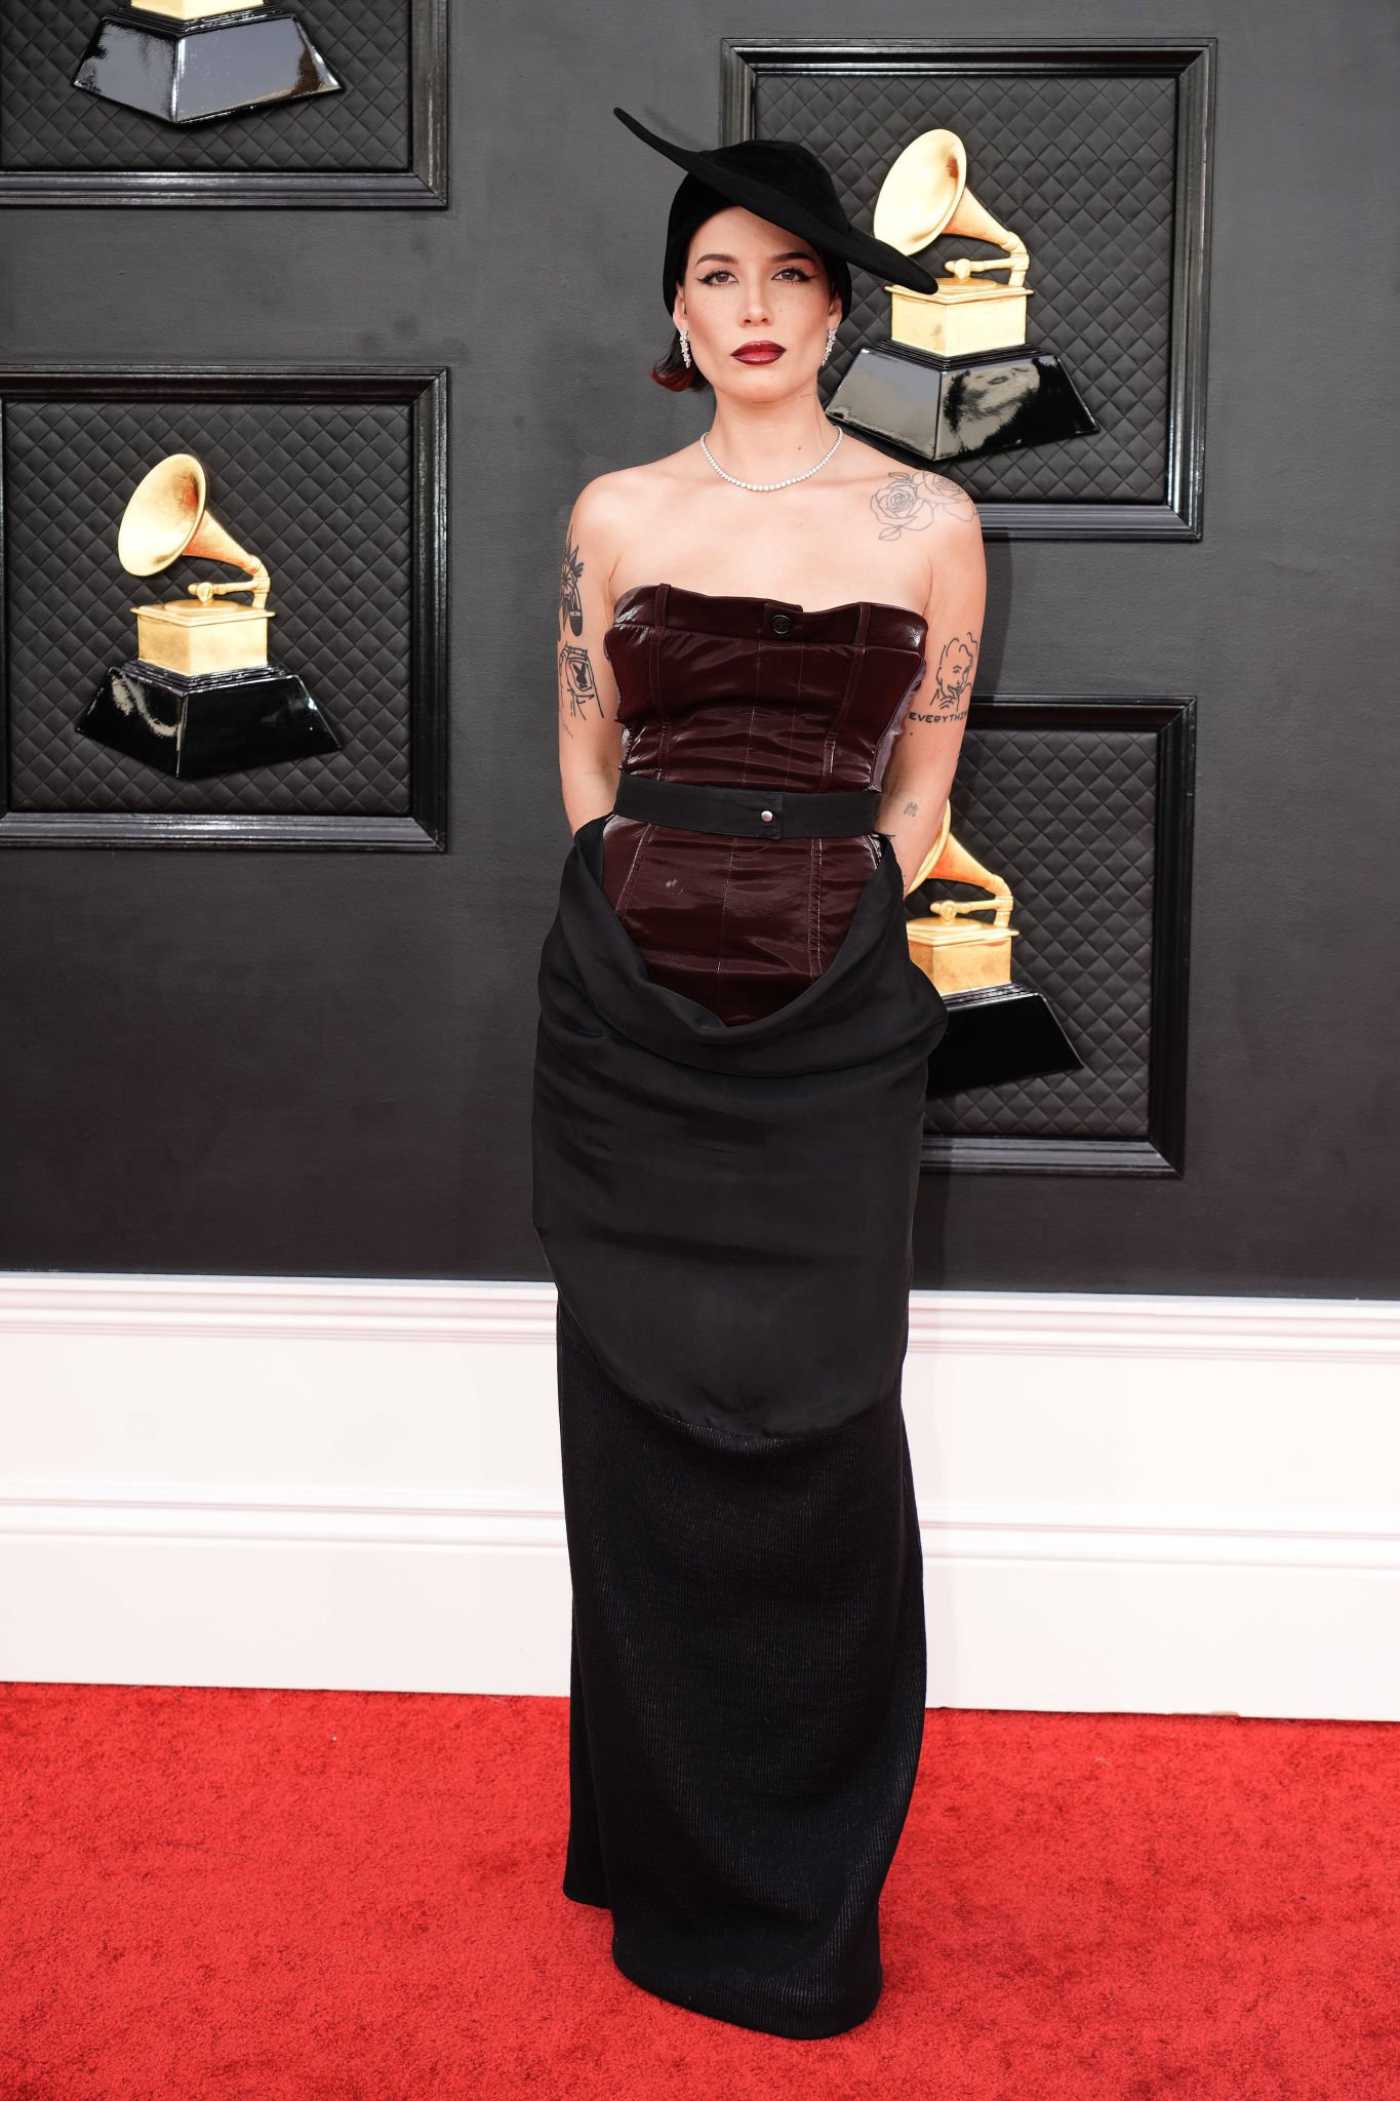 Halsey Attends the 64th Annual Grammy Awards at the MGM Grand Garden Arena in Las Vegas 04/03/2022